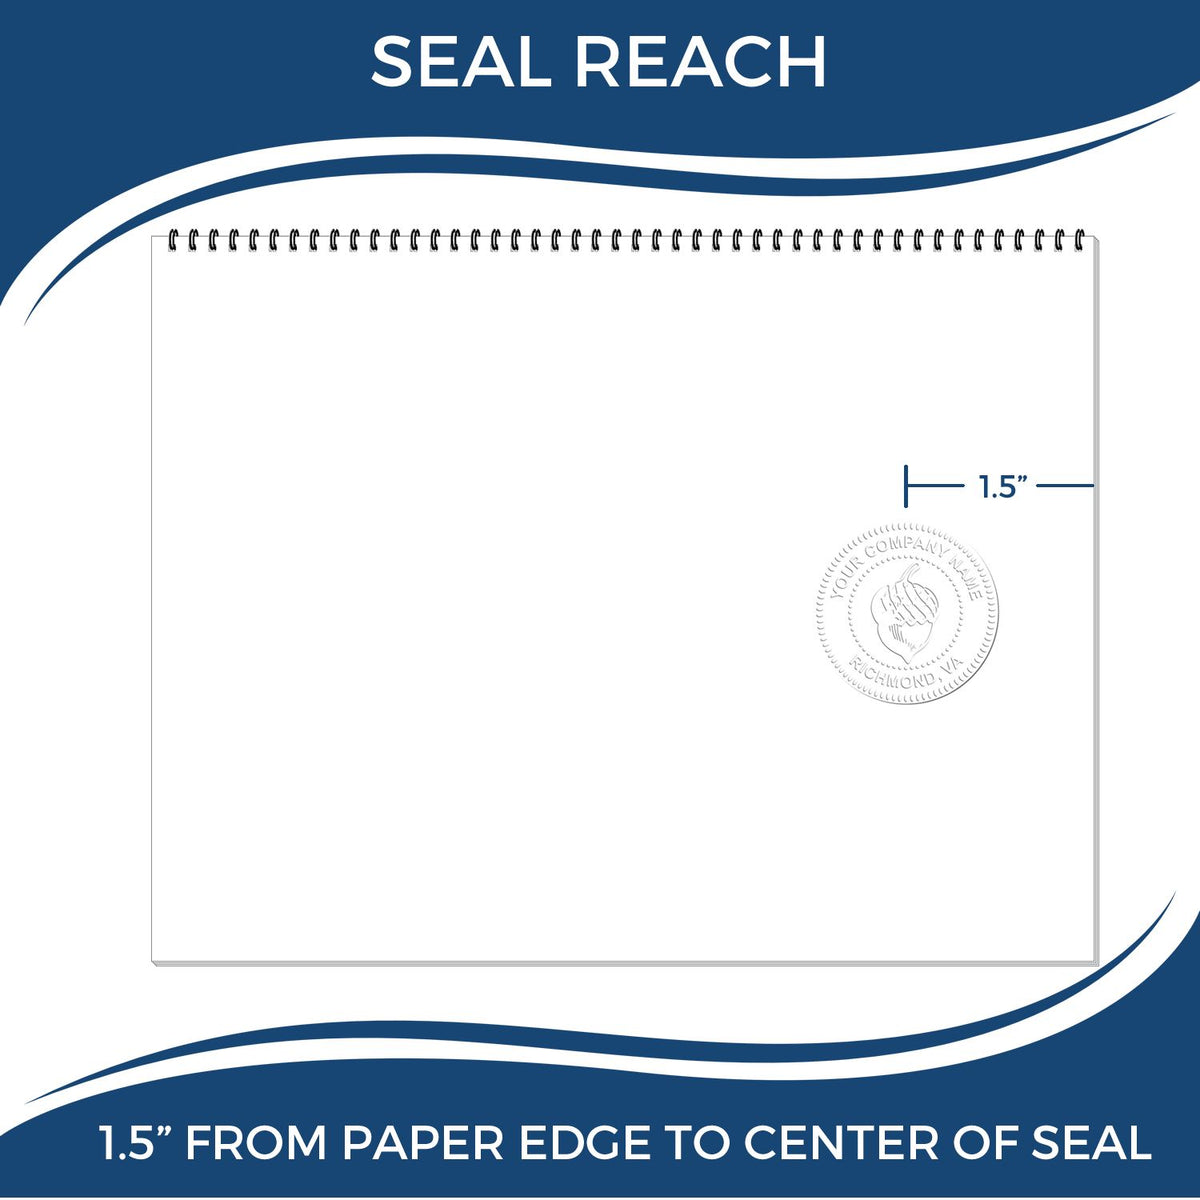 An infographic showing the seal reach which is represented by a ruler and a miniature seal image of the Handheld Guam Land Surveyor Seal